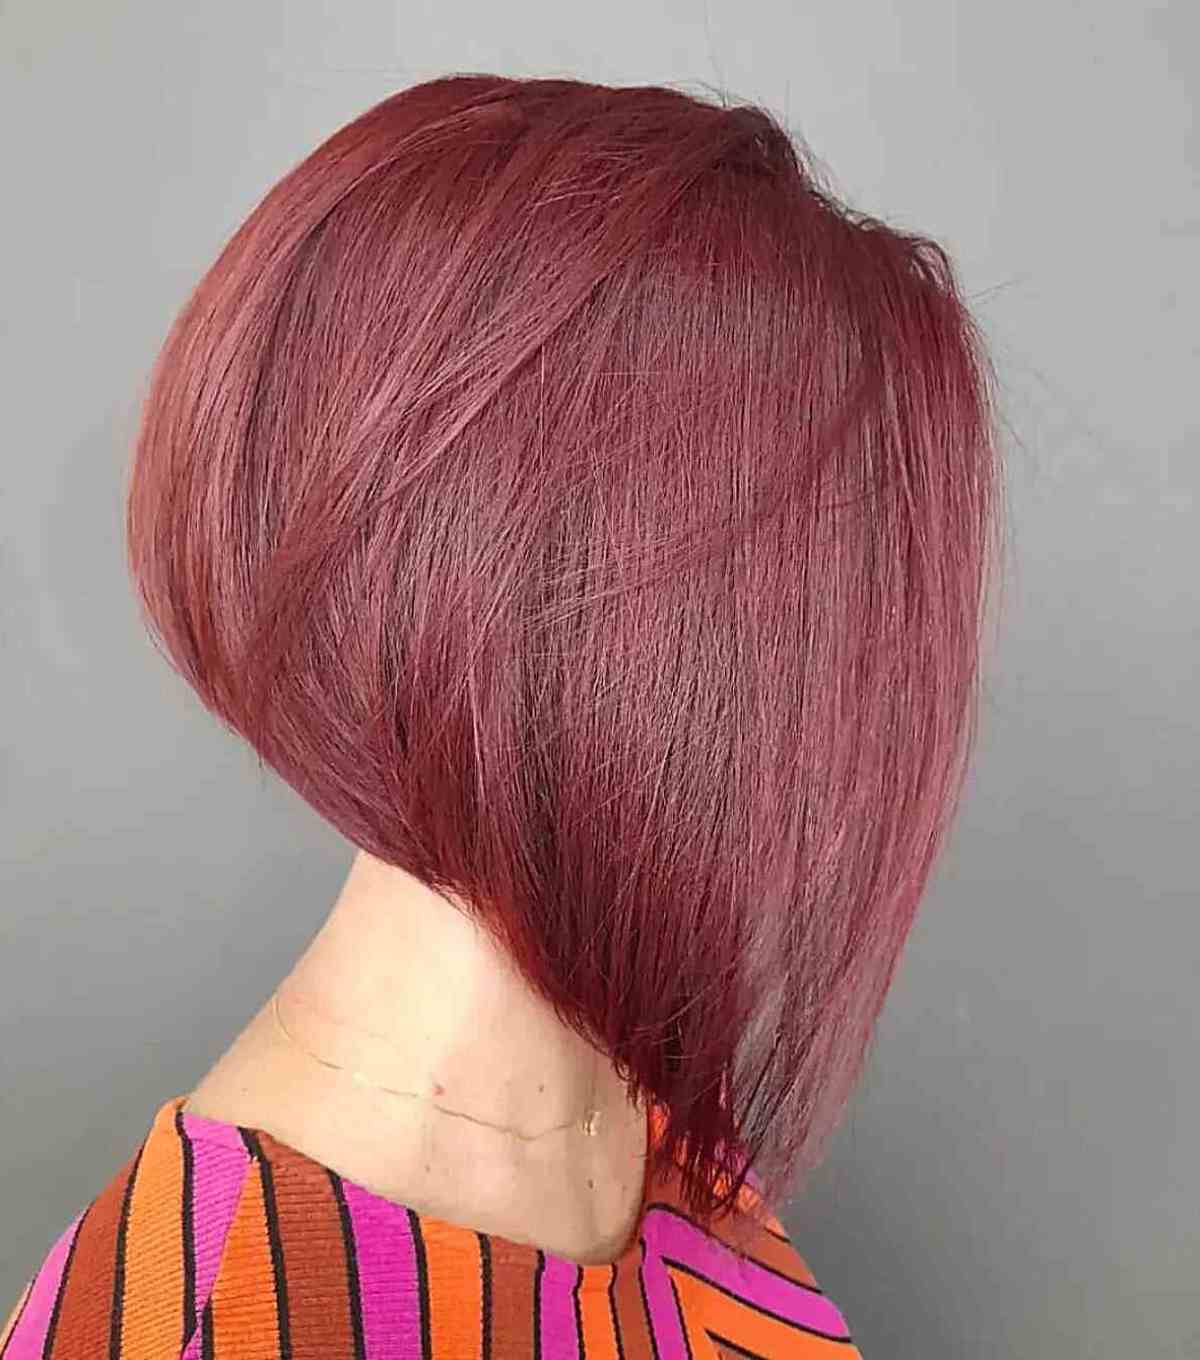 Short Maroon A-Line Bob Cut for women with layers and an edgy style